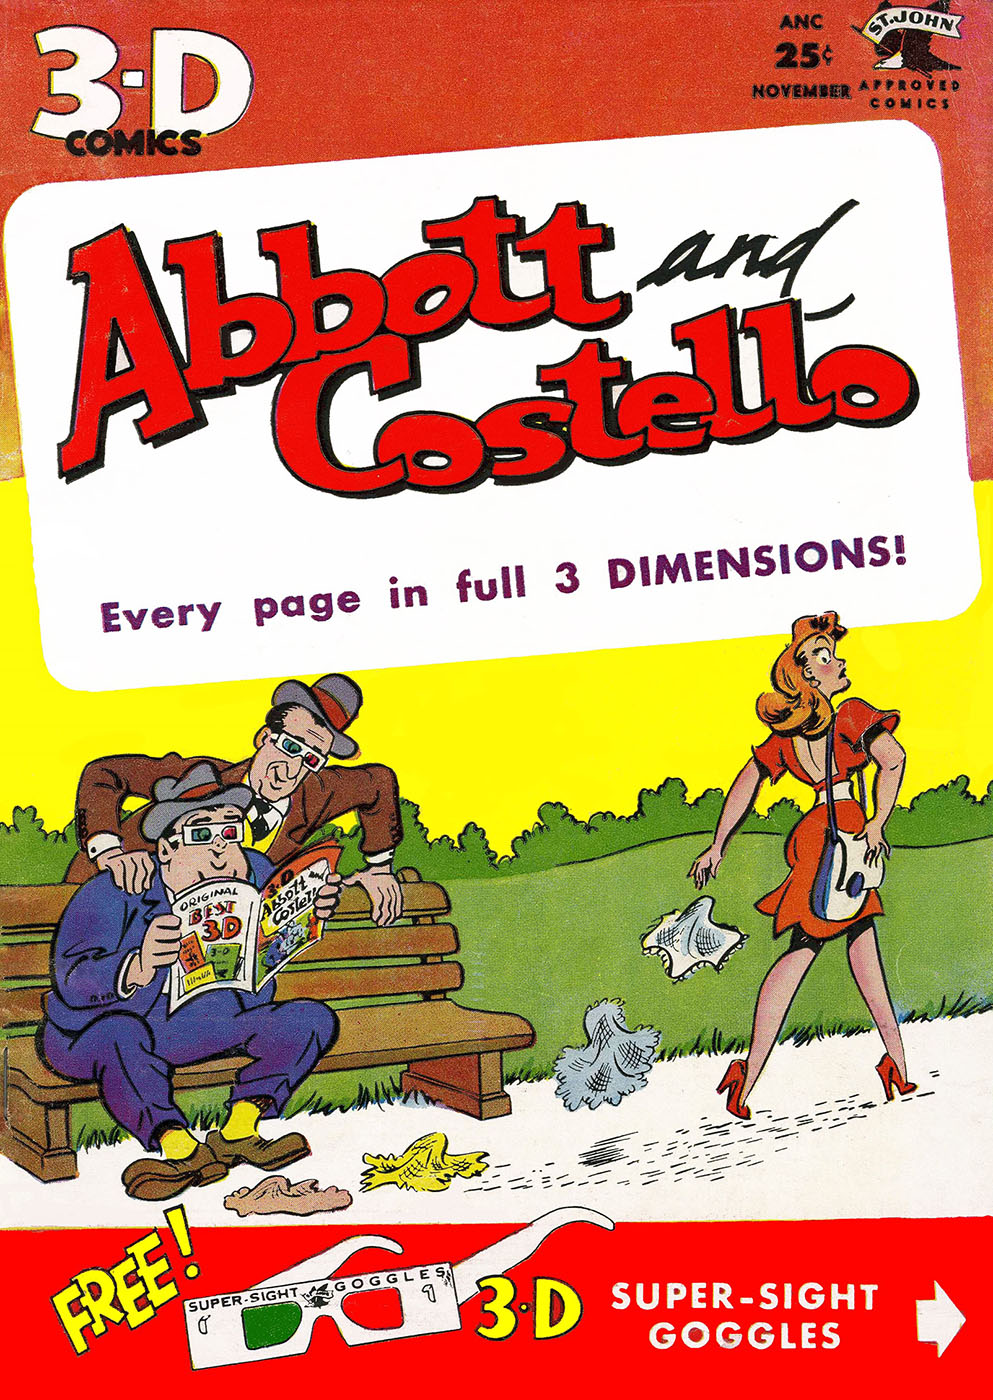 Abbott and Costello’s Journey into 3D